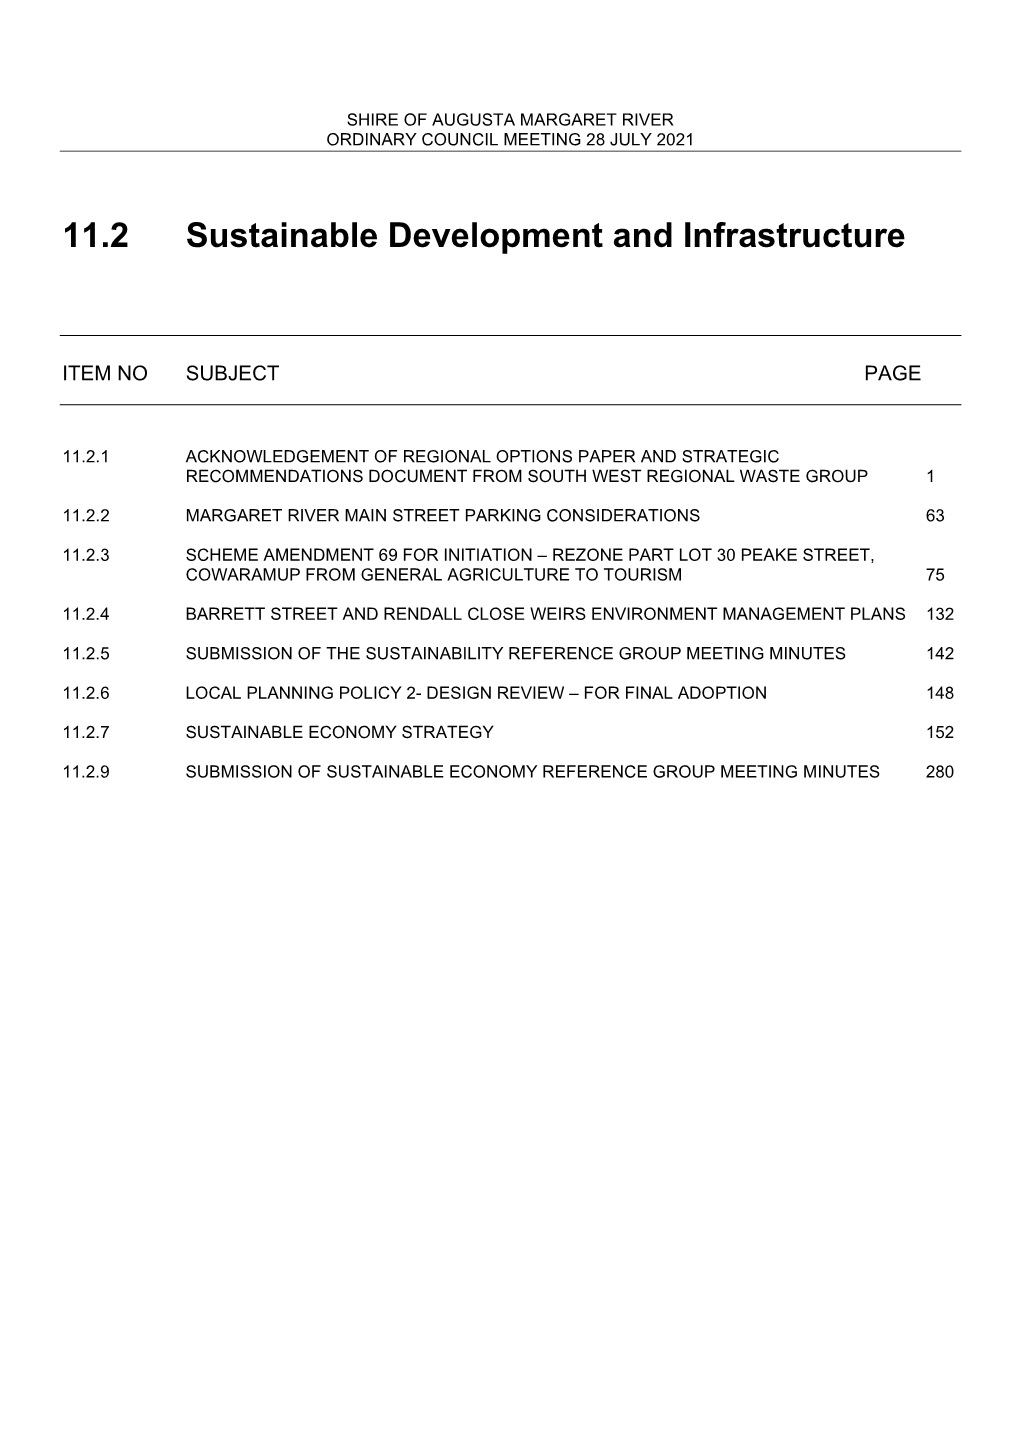 11.2 Sustainable Development and Infrastructure